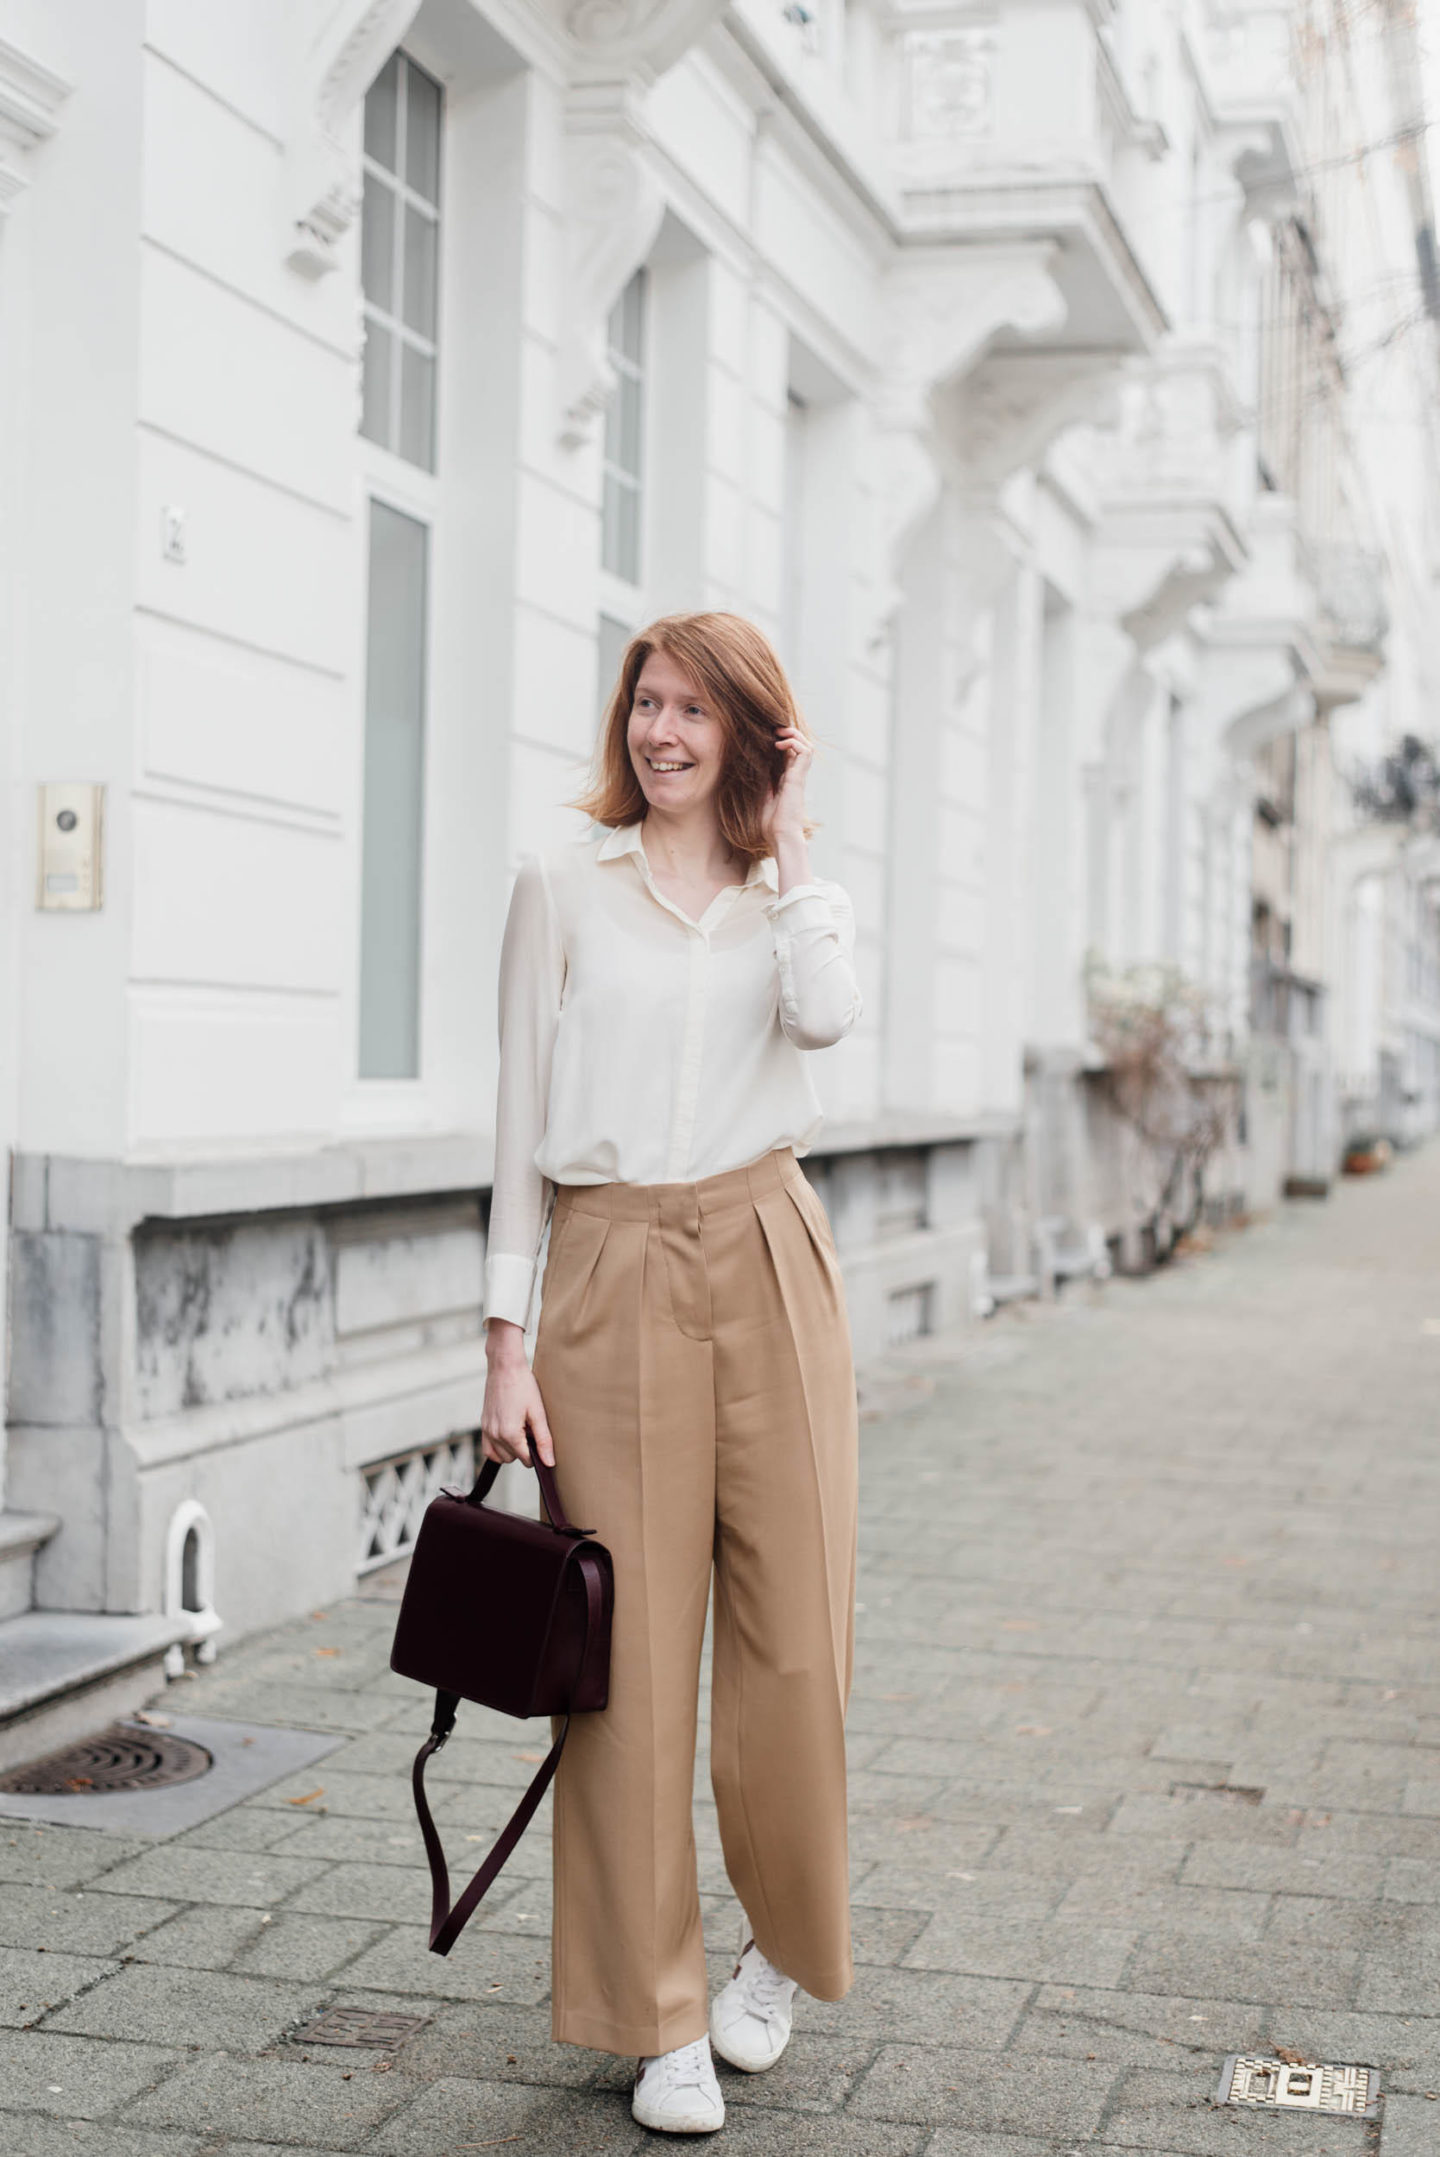 Wide Leg Pants for a Seriously Chic Wardrobe